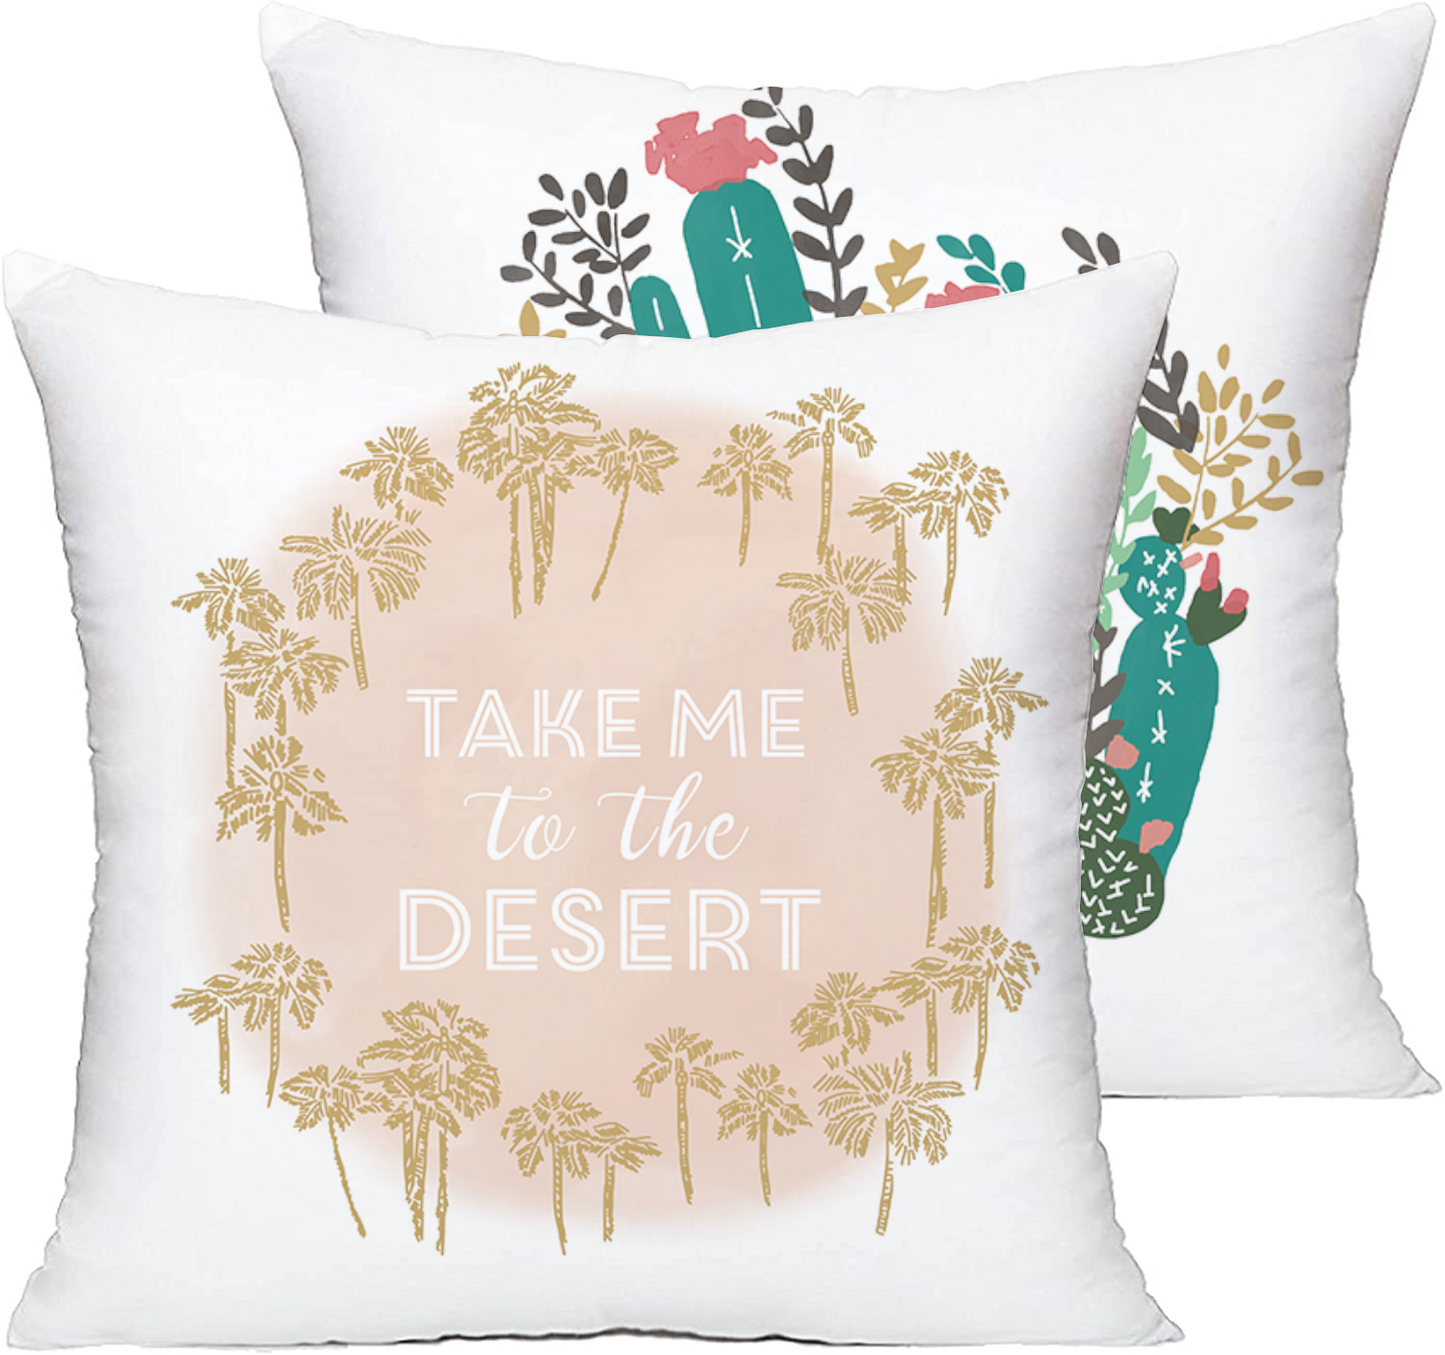 Palm Springs in Coachella 20" Pillow Cover